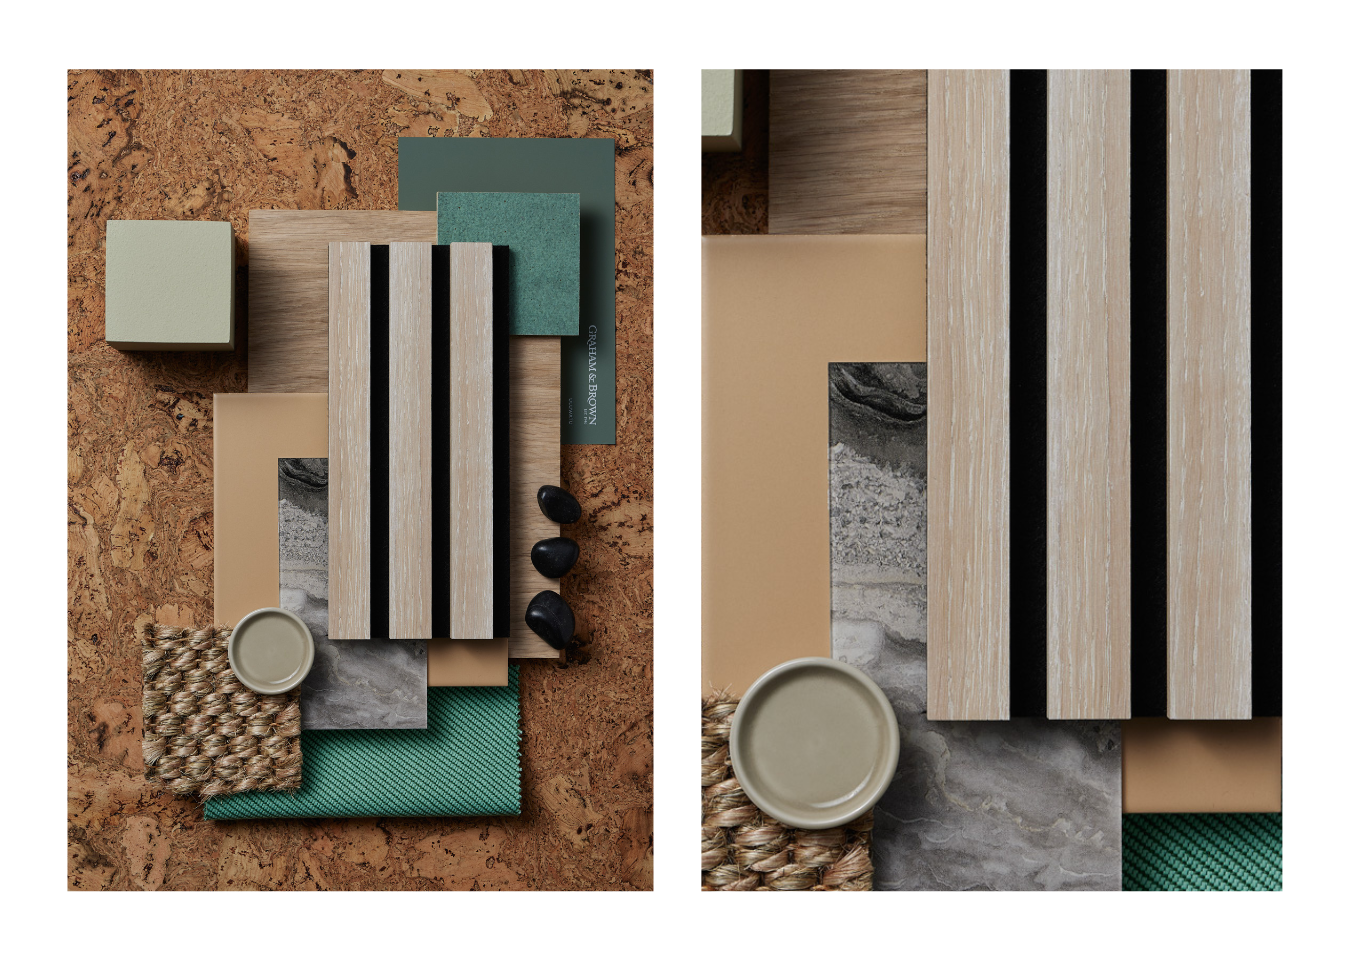 Mood board for interior design featuring SlatWall Washed Oak and CorkWall Cascais Natural samples with green swatches.